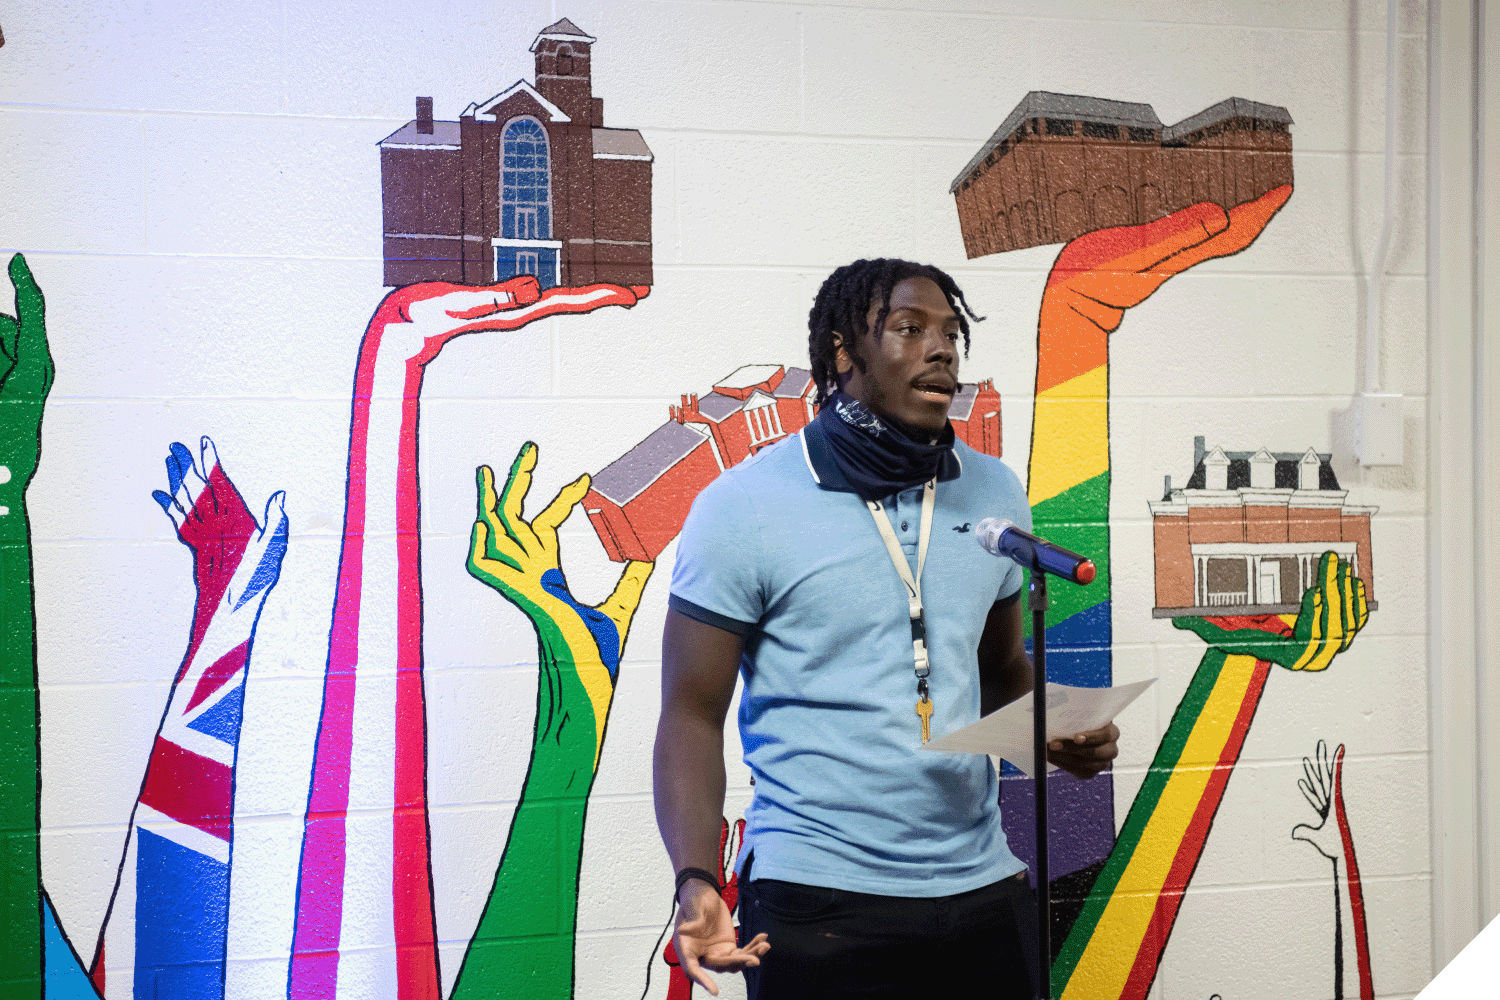 A student speaking into a microphone while standing in front of the diversity mural inside the Multicultural Center.